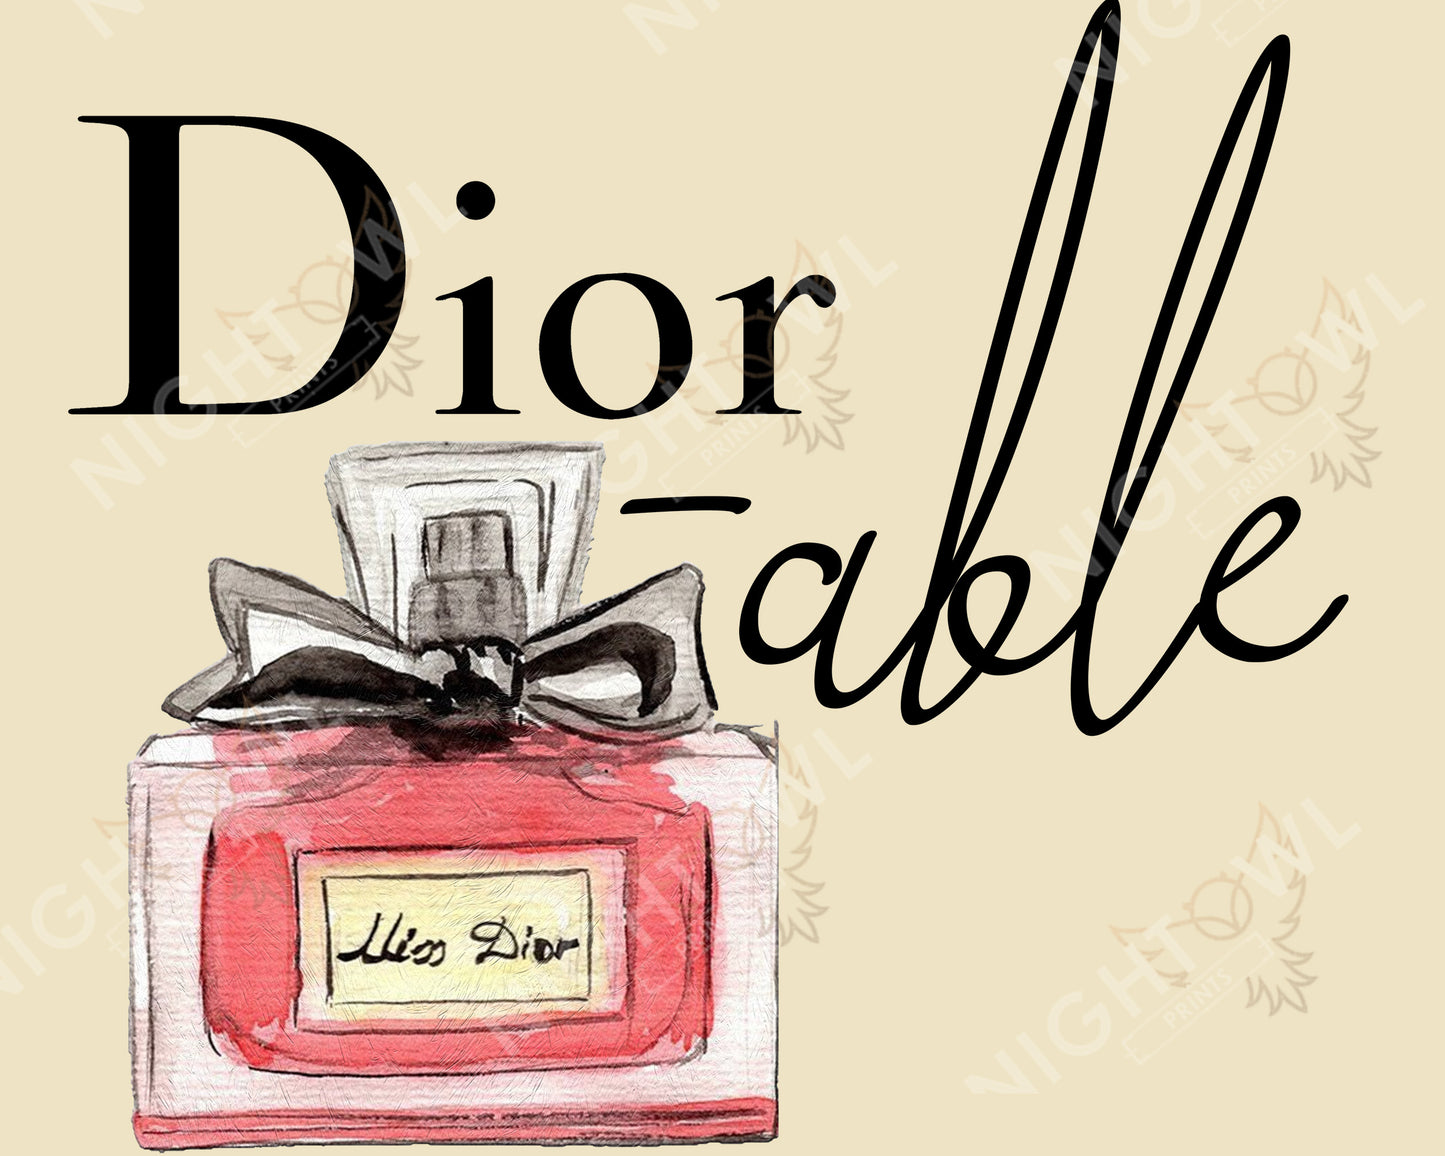 Dior-able DTF Transfer.